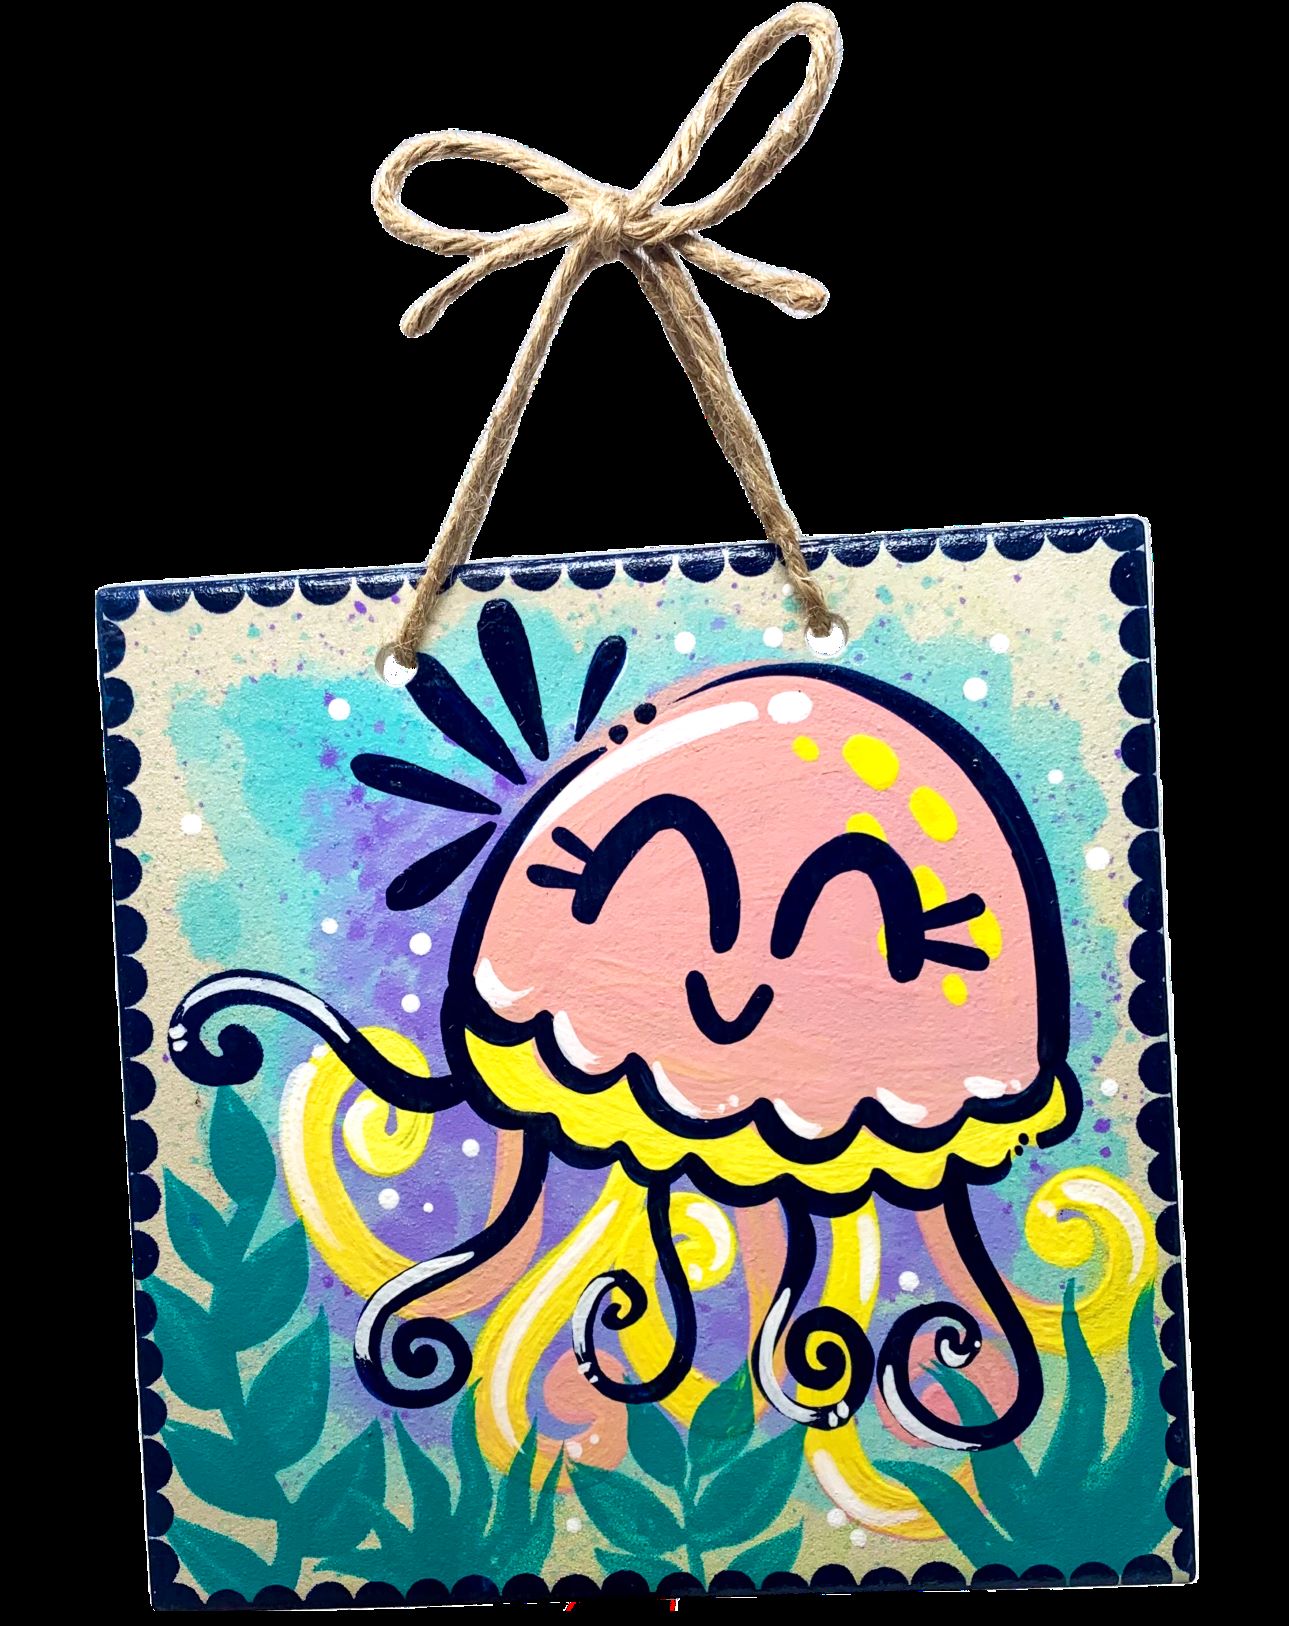 Hanging ceramic tile with pink smiling jellyfish and undersea plants painted on it, on a black background